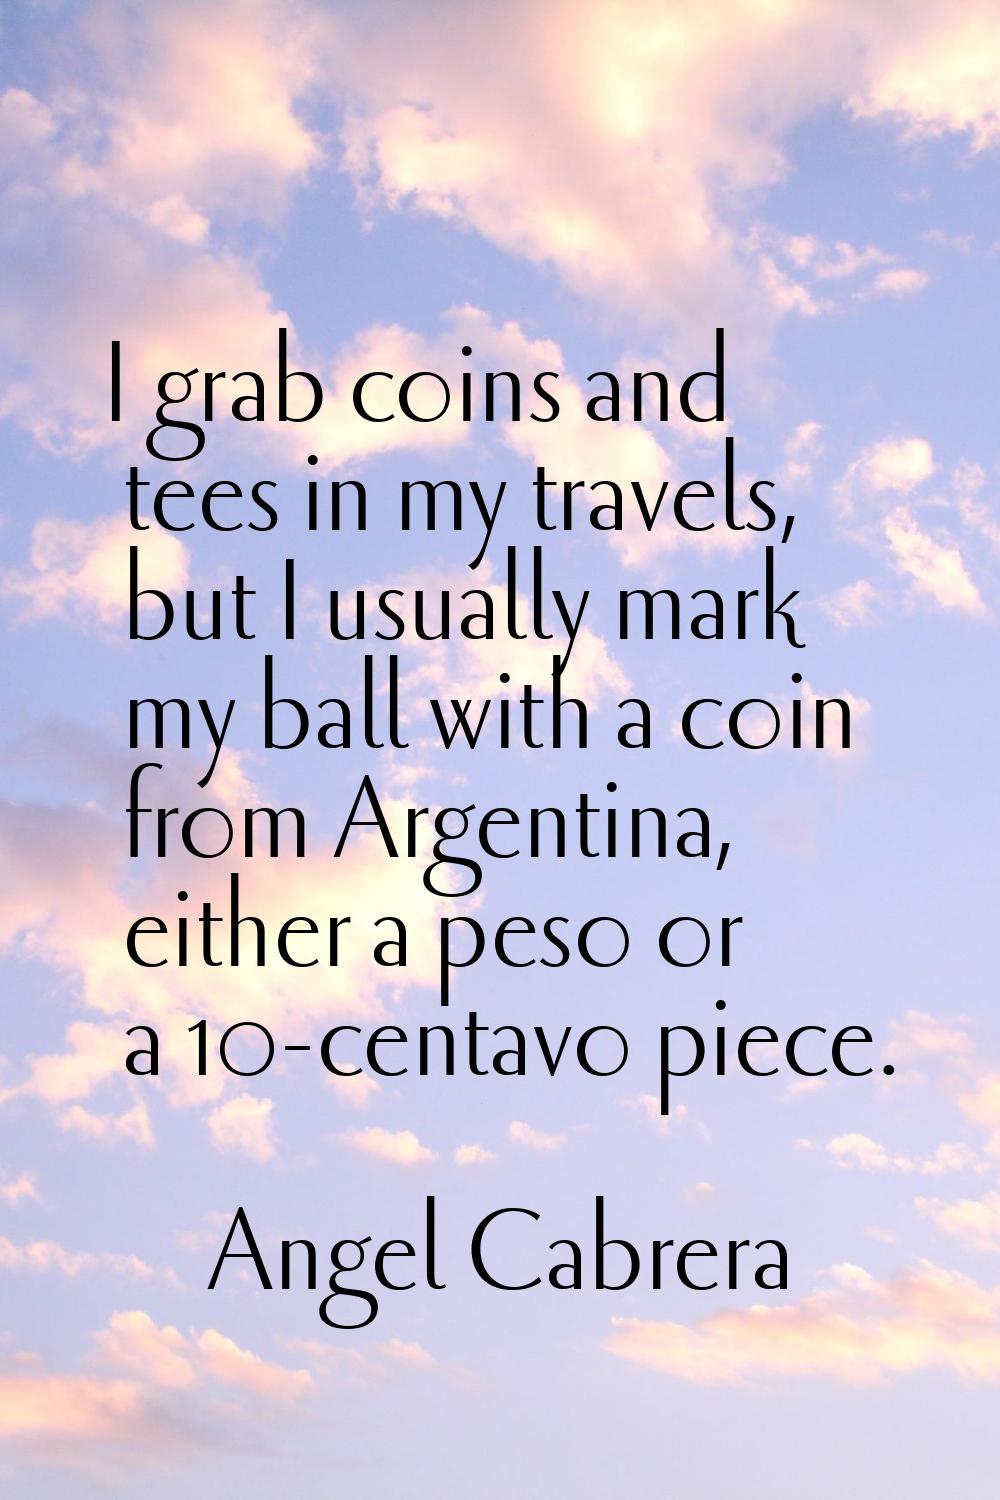 I grab coins and tees in my travels, but I usually mark my ball with a coin from Argentina, either 